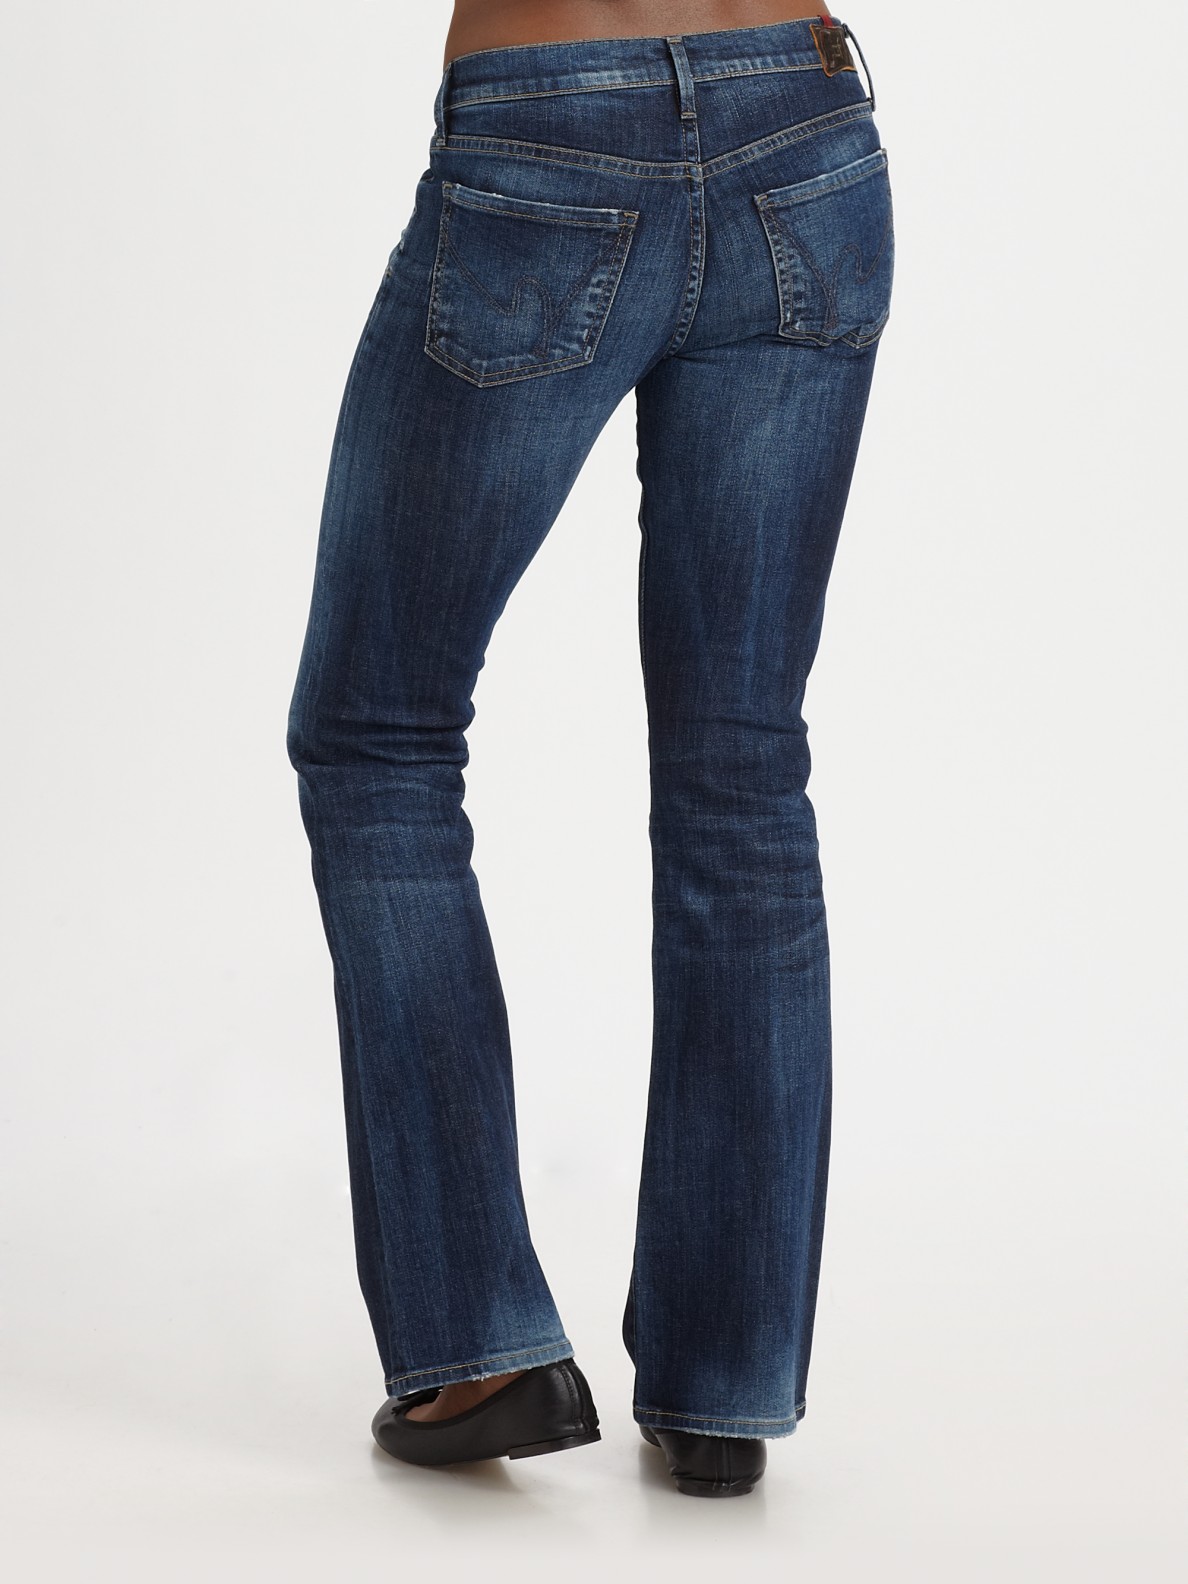 Citizens of humanity Dita Petite Bootcut Jeans in Black | Lyst